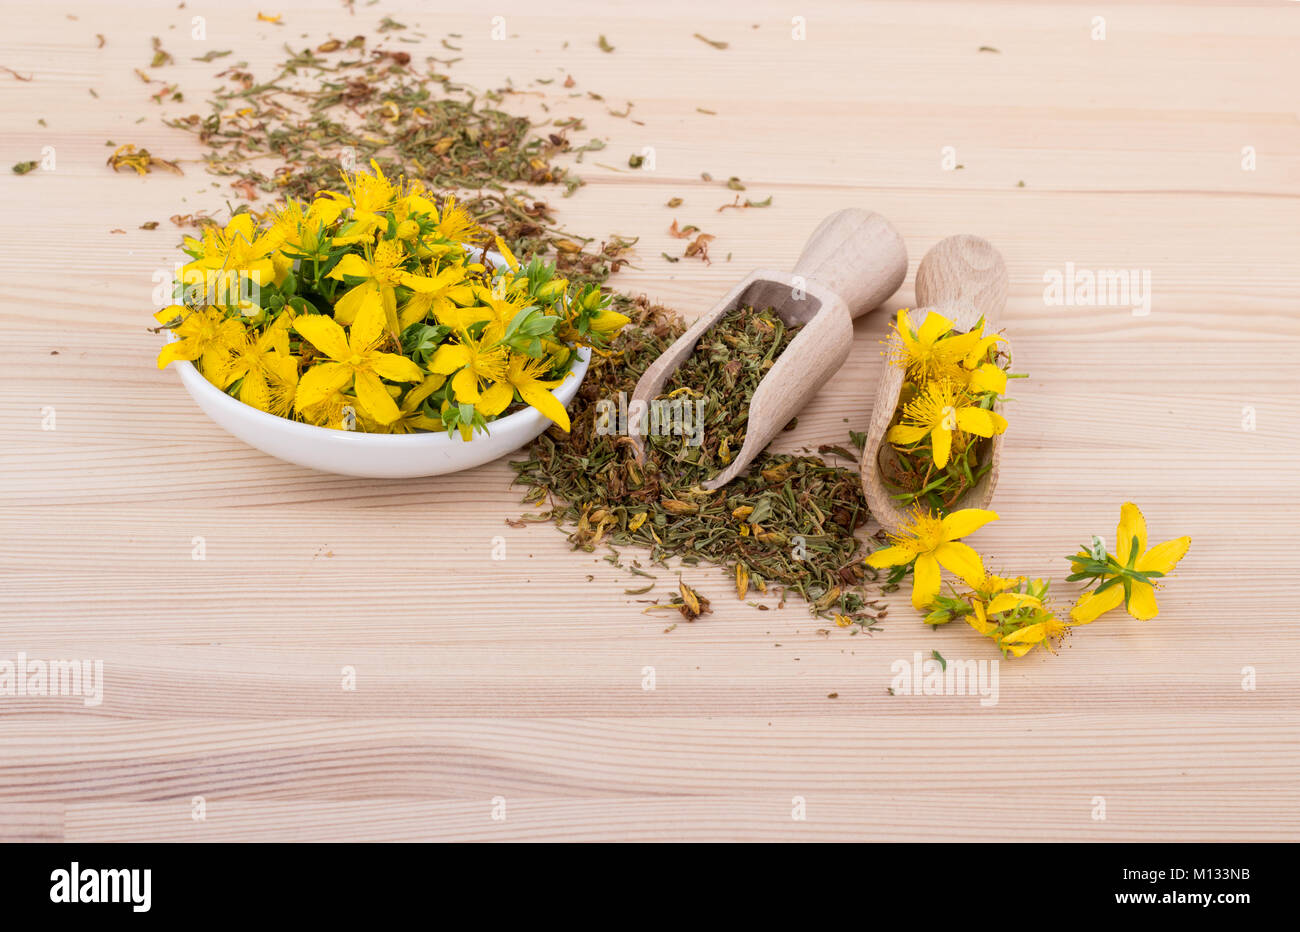 dried and fresh, flowering St. John's wort with bowl and spoons on a wooden background Stock Photo